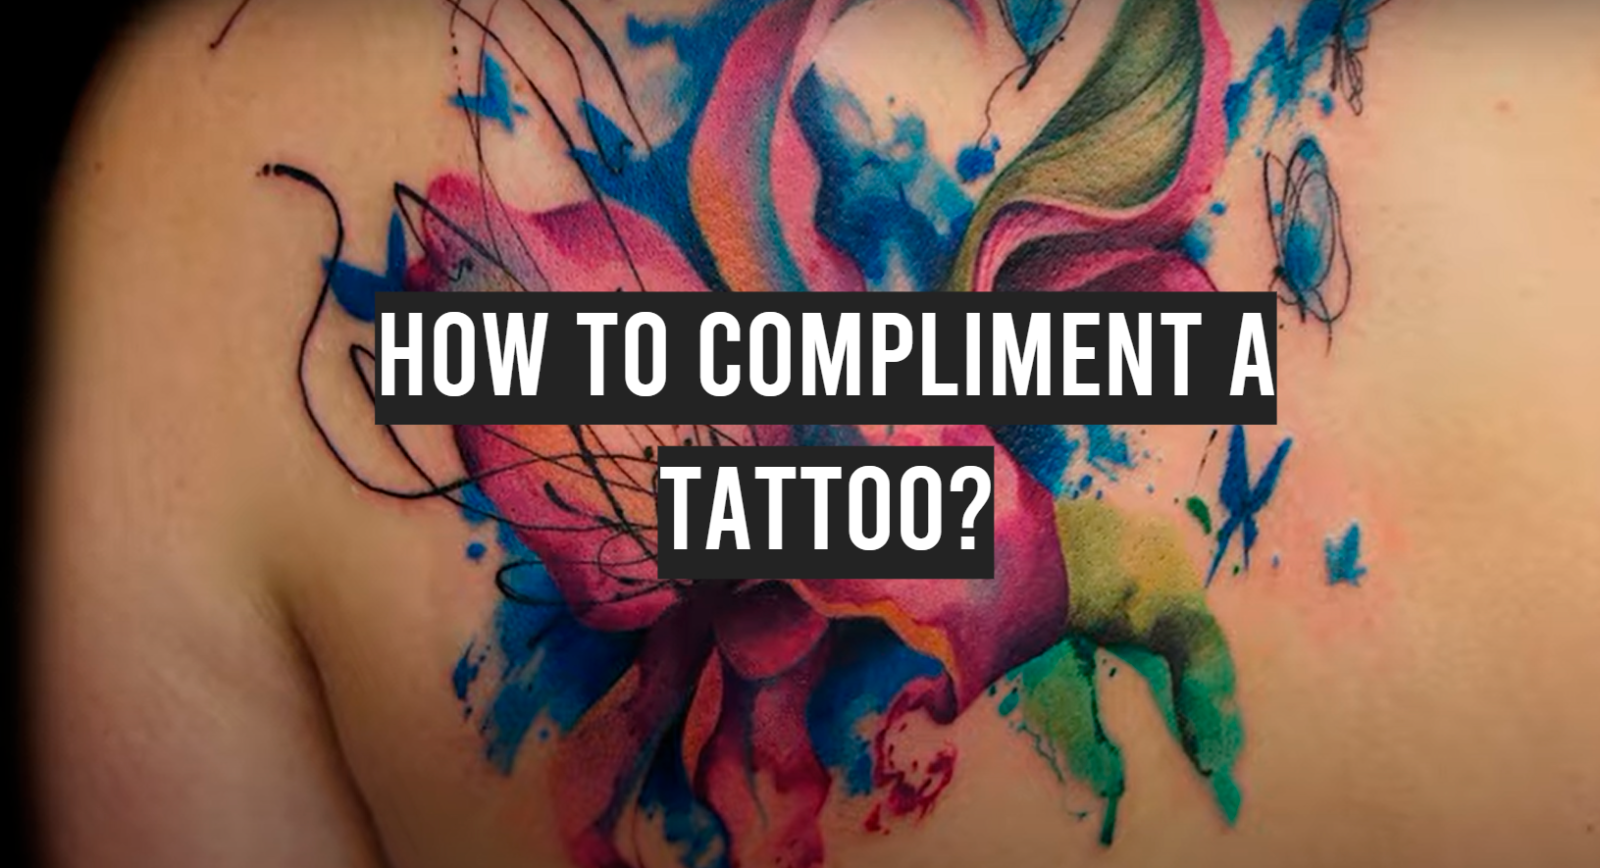 How to Compliment a Tattoo?